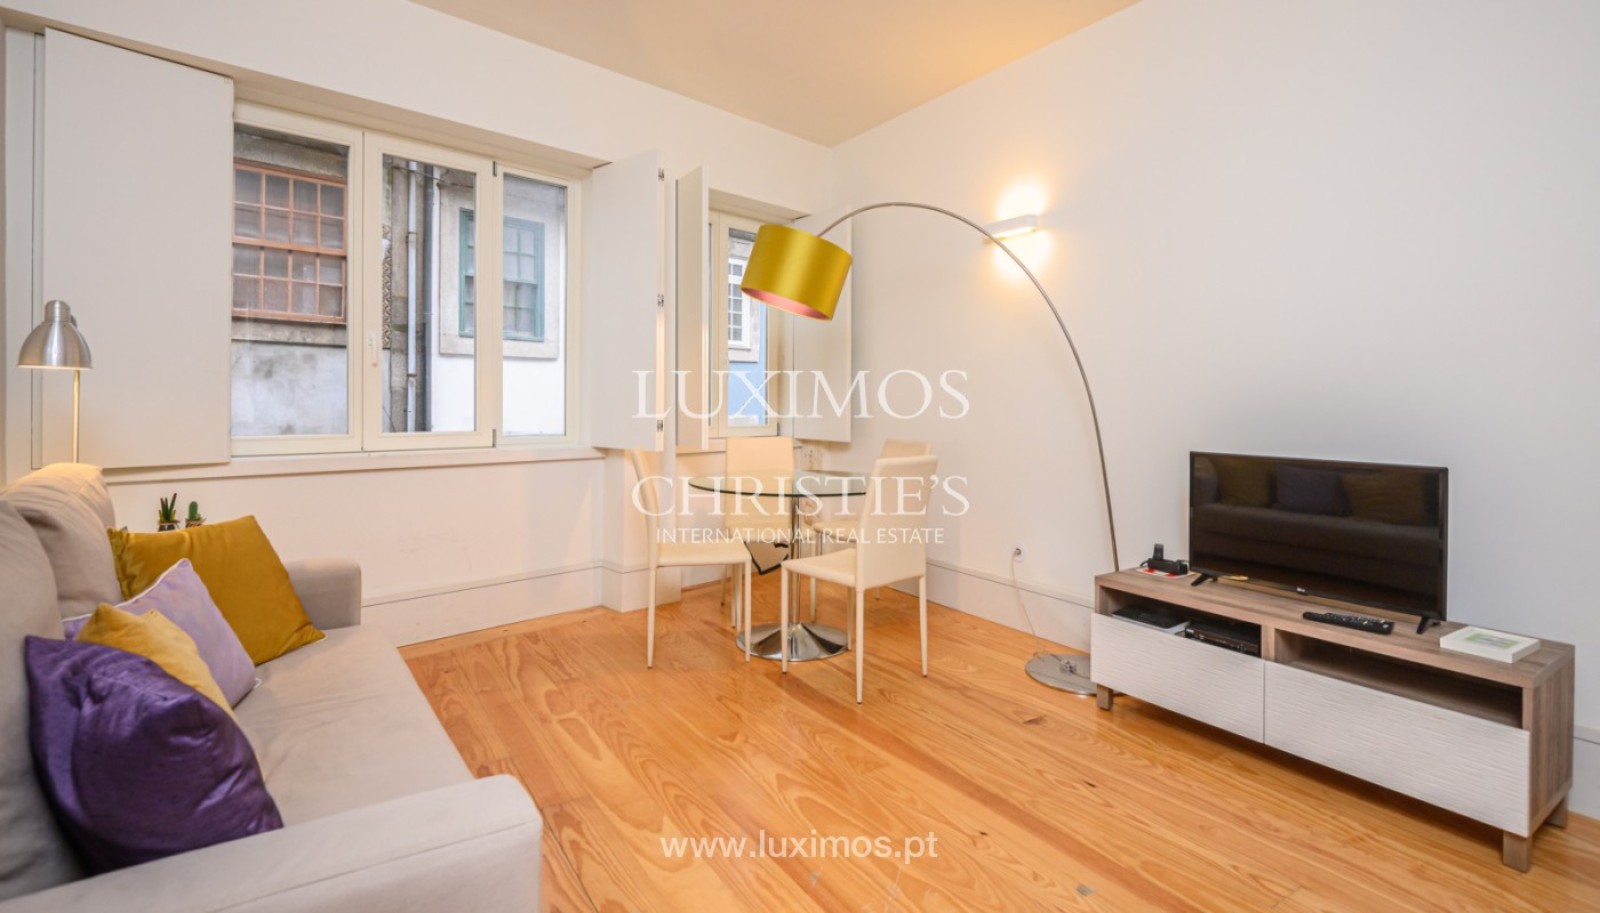 One-bedroom flat with interior patio, for sale, in historic center, Porto, Portugal_248886